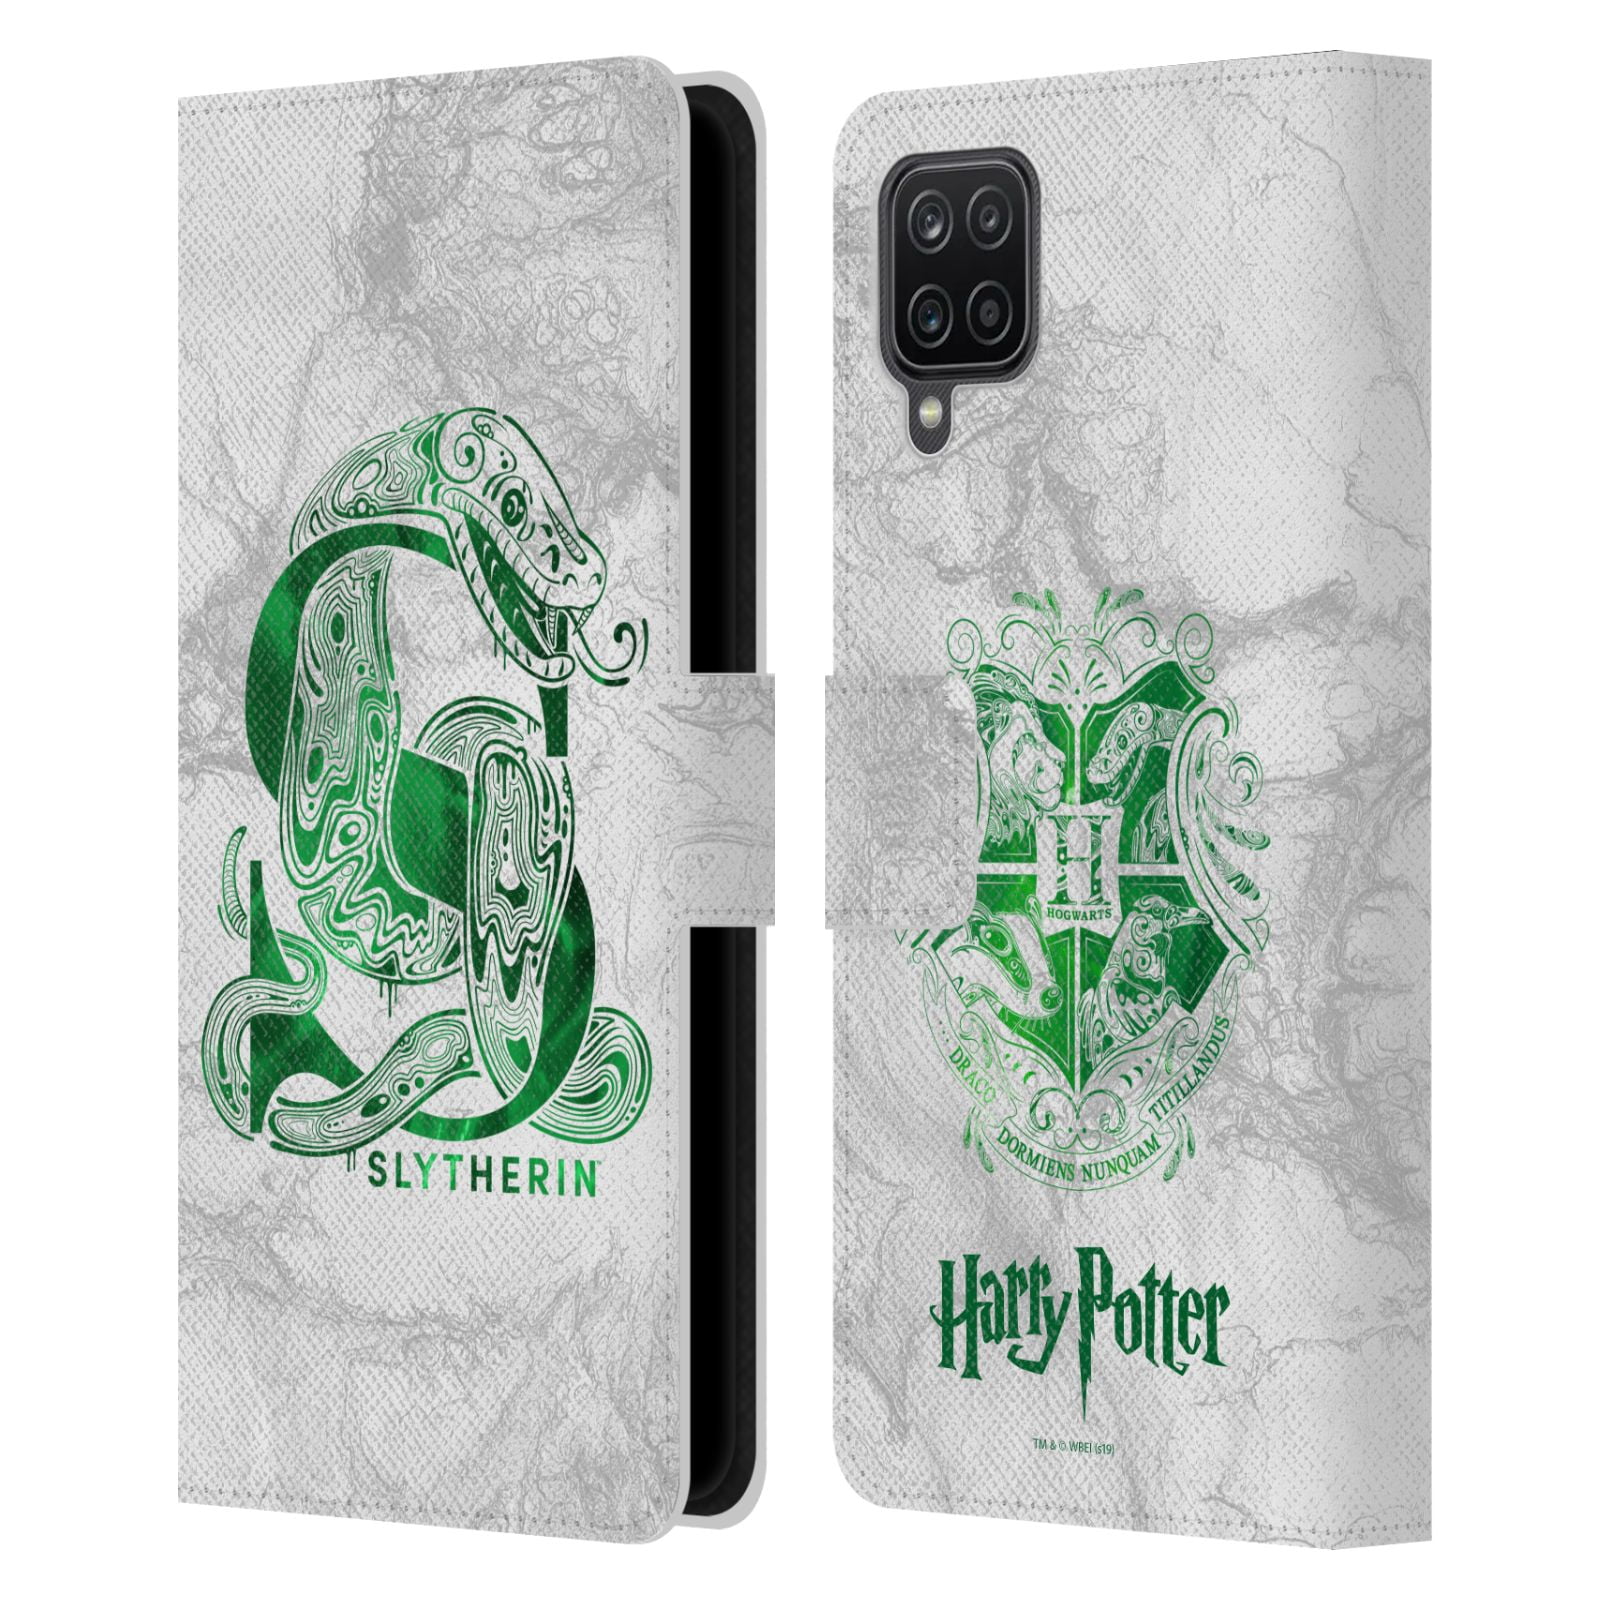 Head Case Designs Officially Licensed Harry Potter Hermione Granger Deathly Hallows XXXVI Black Soft Gel Case Compatible With Huawei P8 Lite 2017 